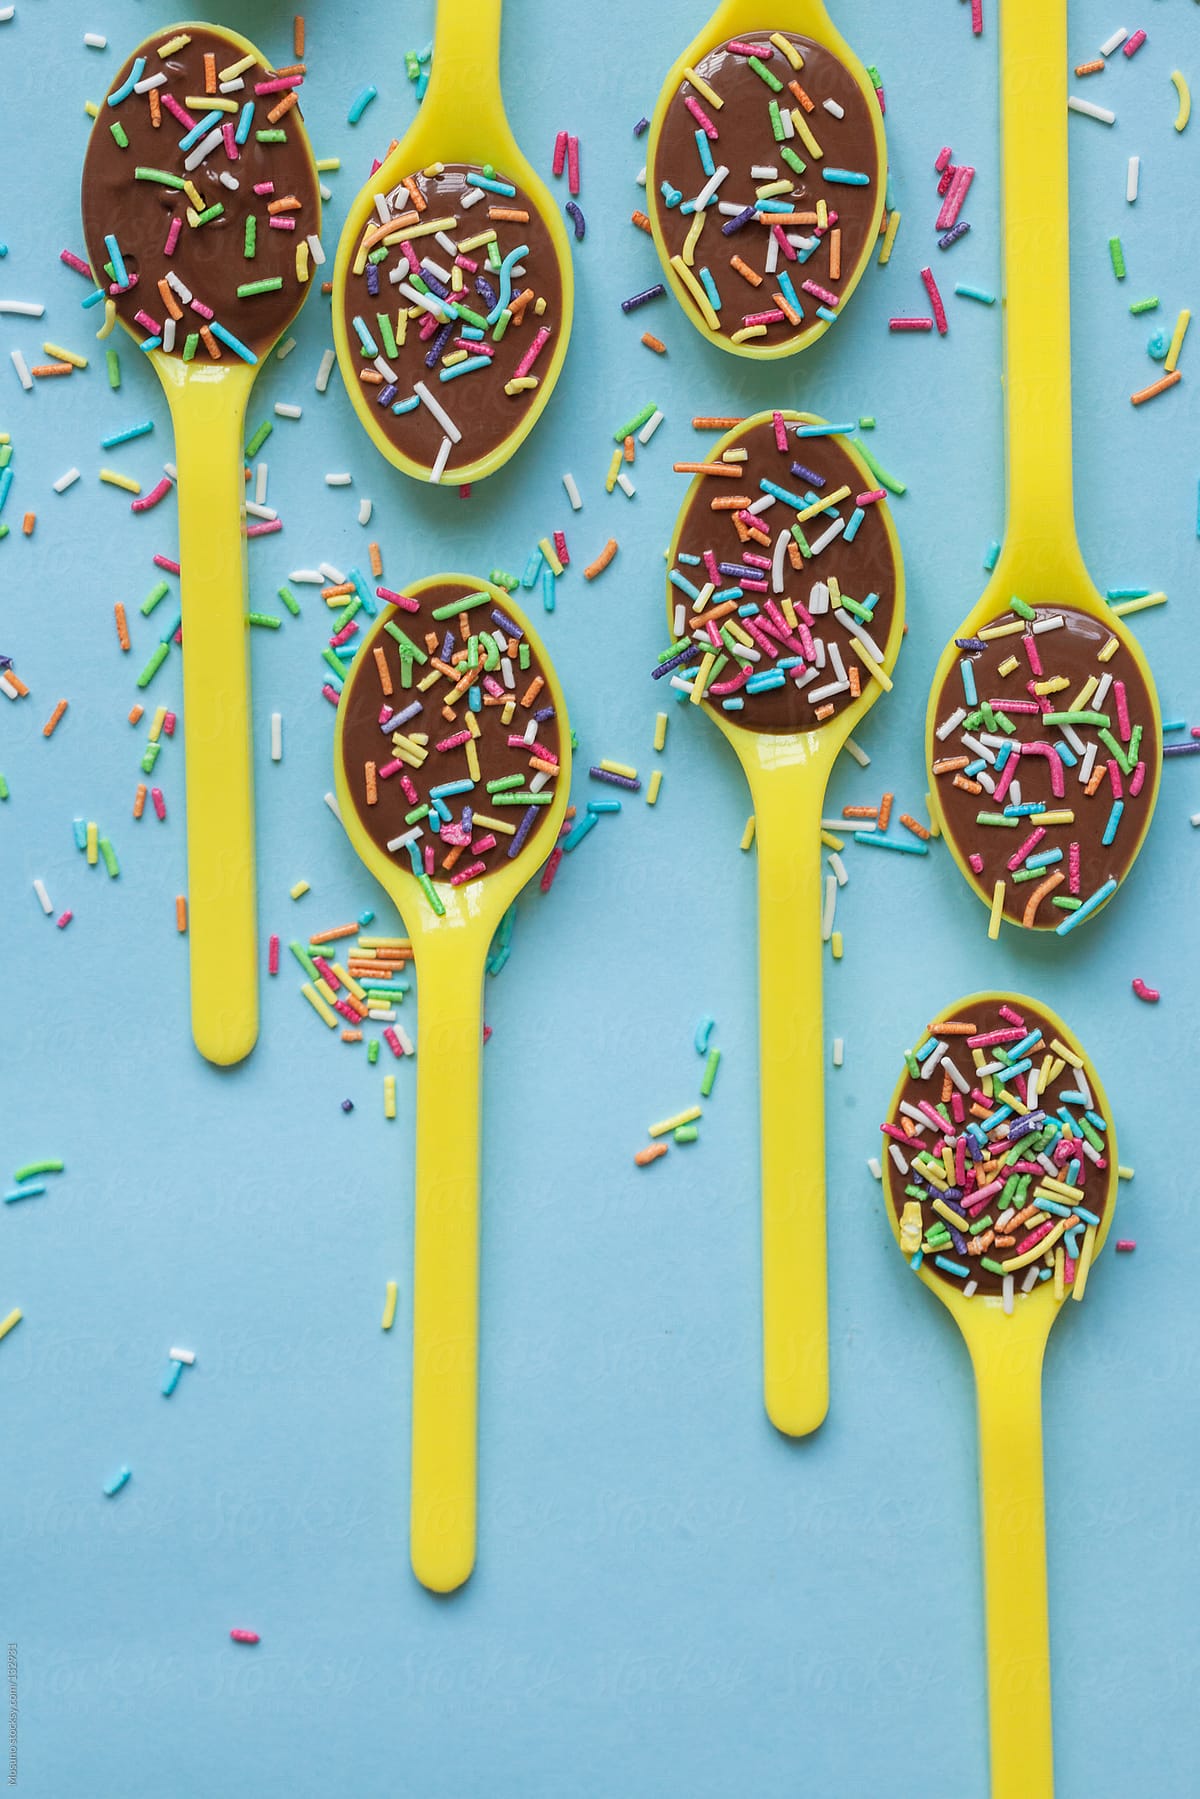 Chocolate pudding in yellow spoons with colorful sprinkles.